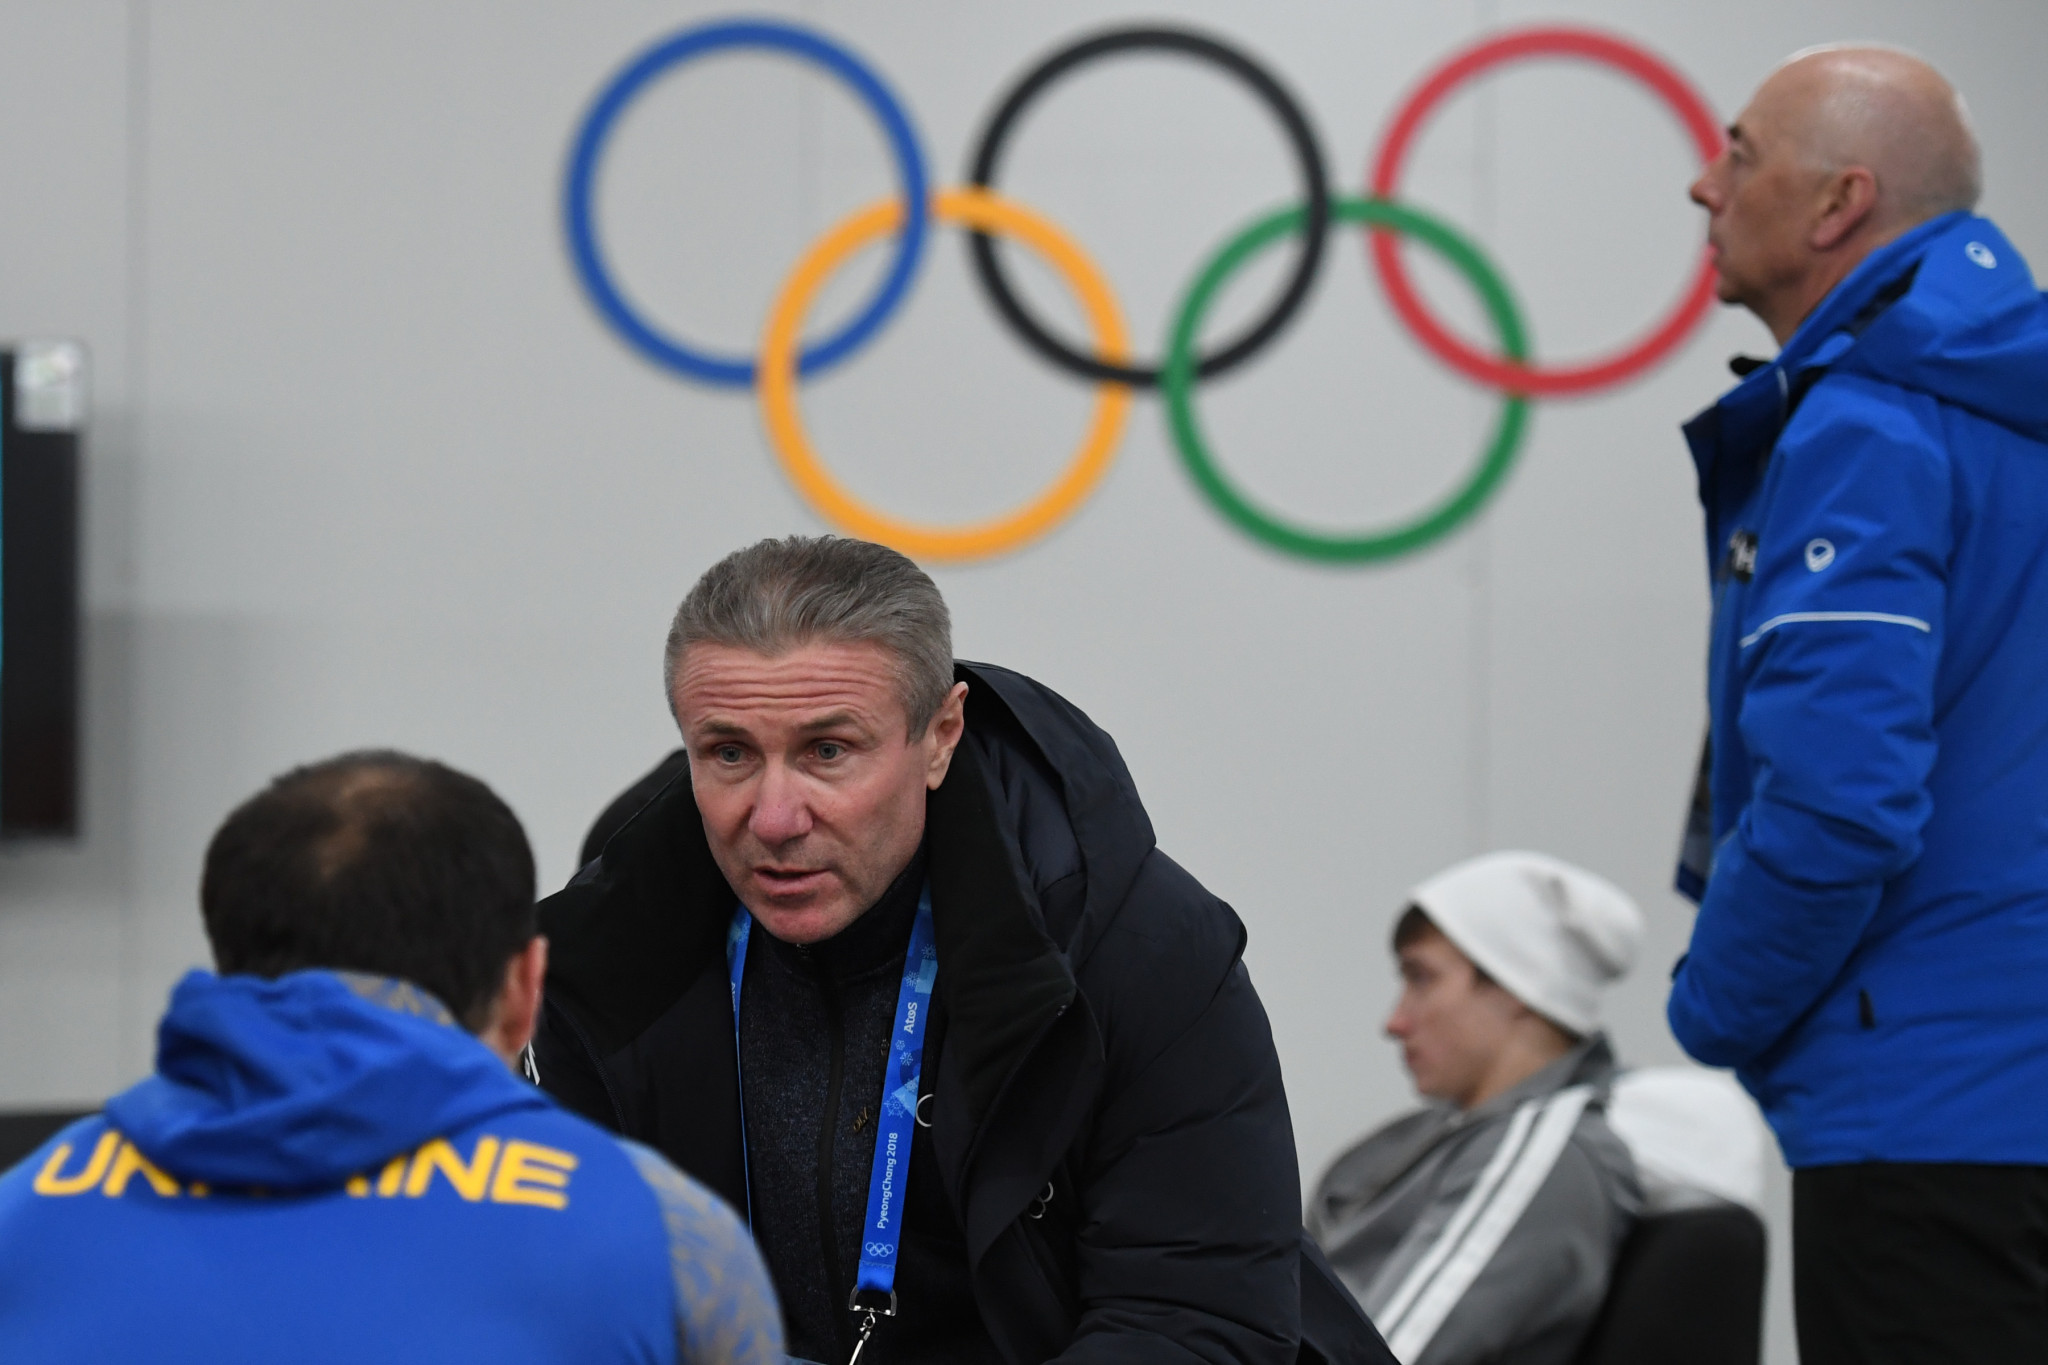 Bubka insists "Ukraine will win" after declaring love for country